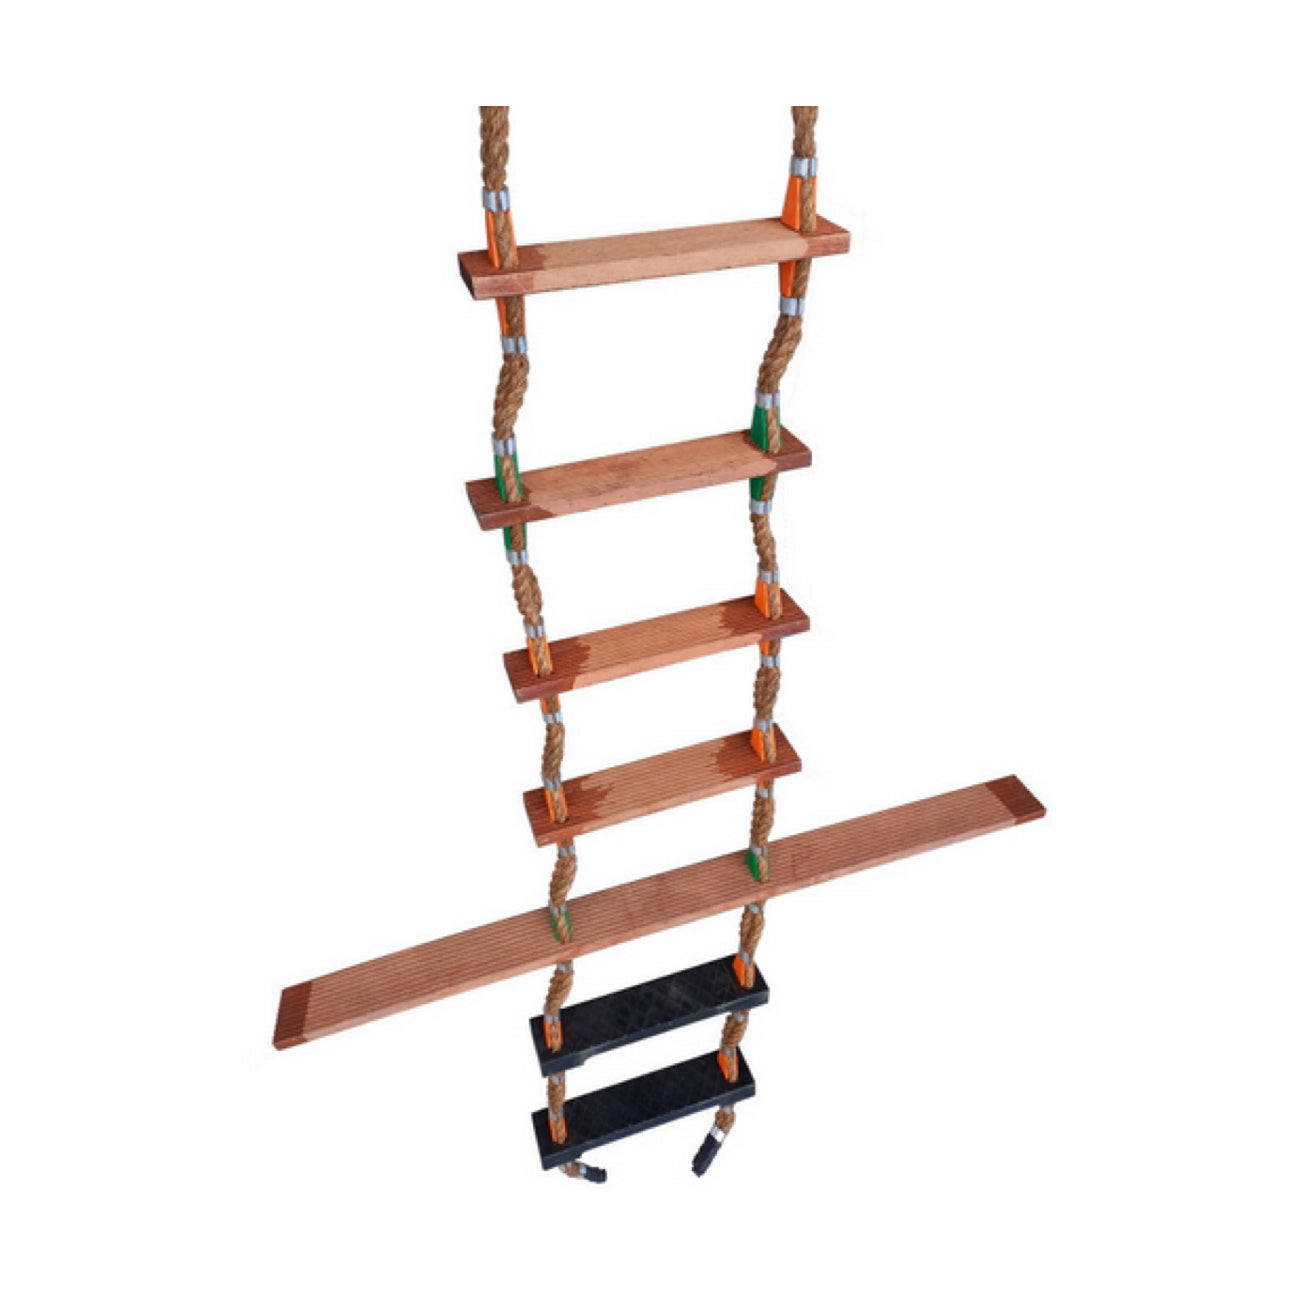 Marine/boat pilot ladders with wood steps and rubber steps at the bottom for extra grip and safety. Shop boat/marine supplies online. Melbourne, Australia. Shipping available. Chain.com.au